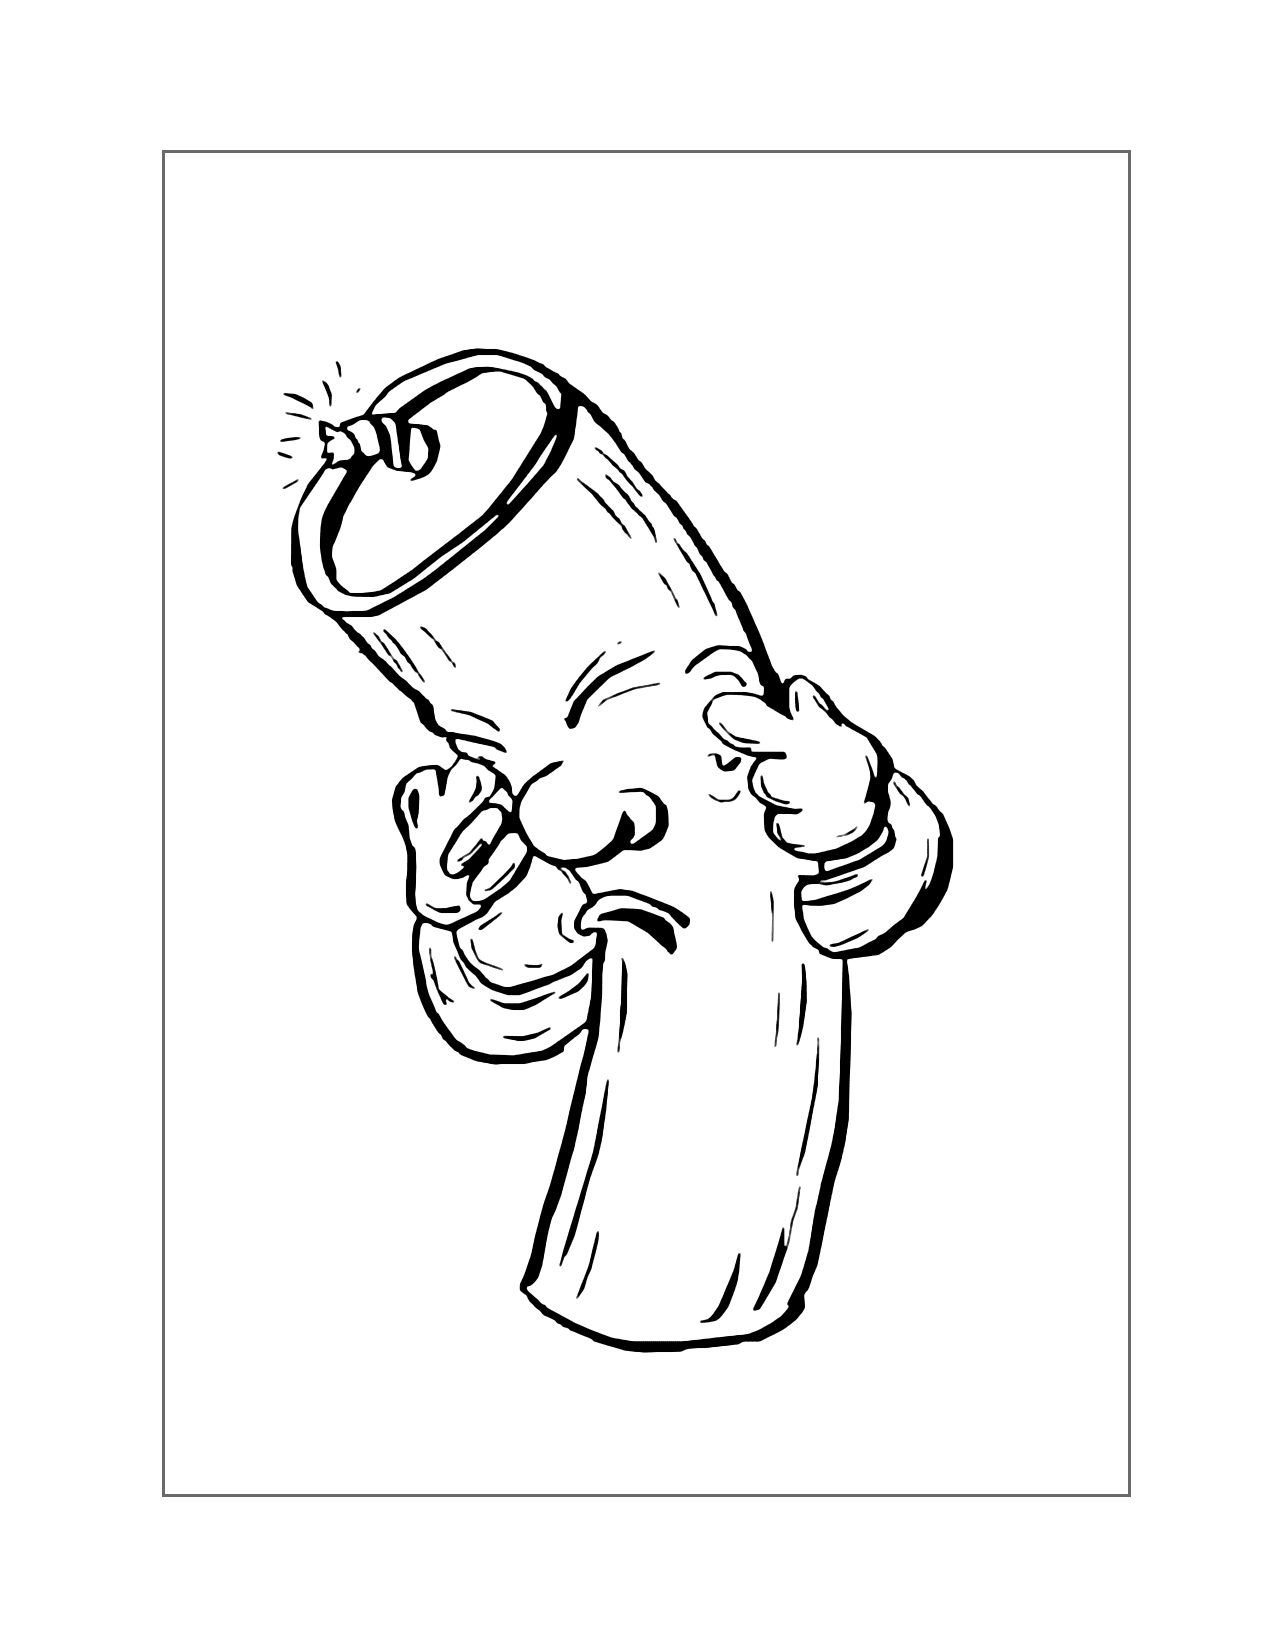 Funny Dynamite Coloring Page